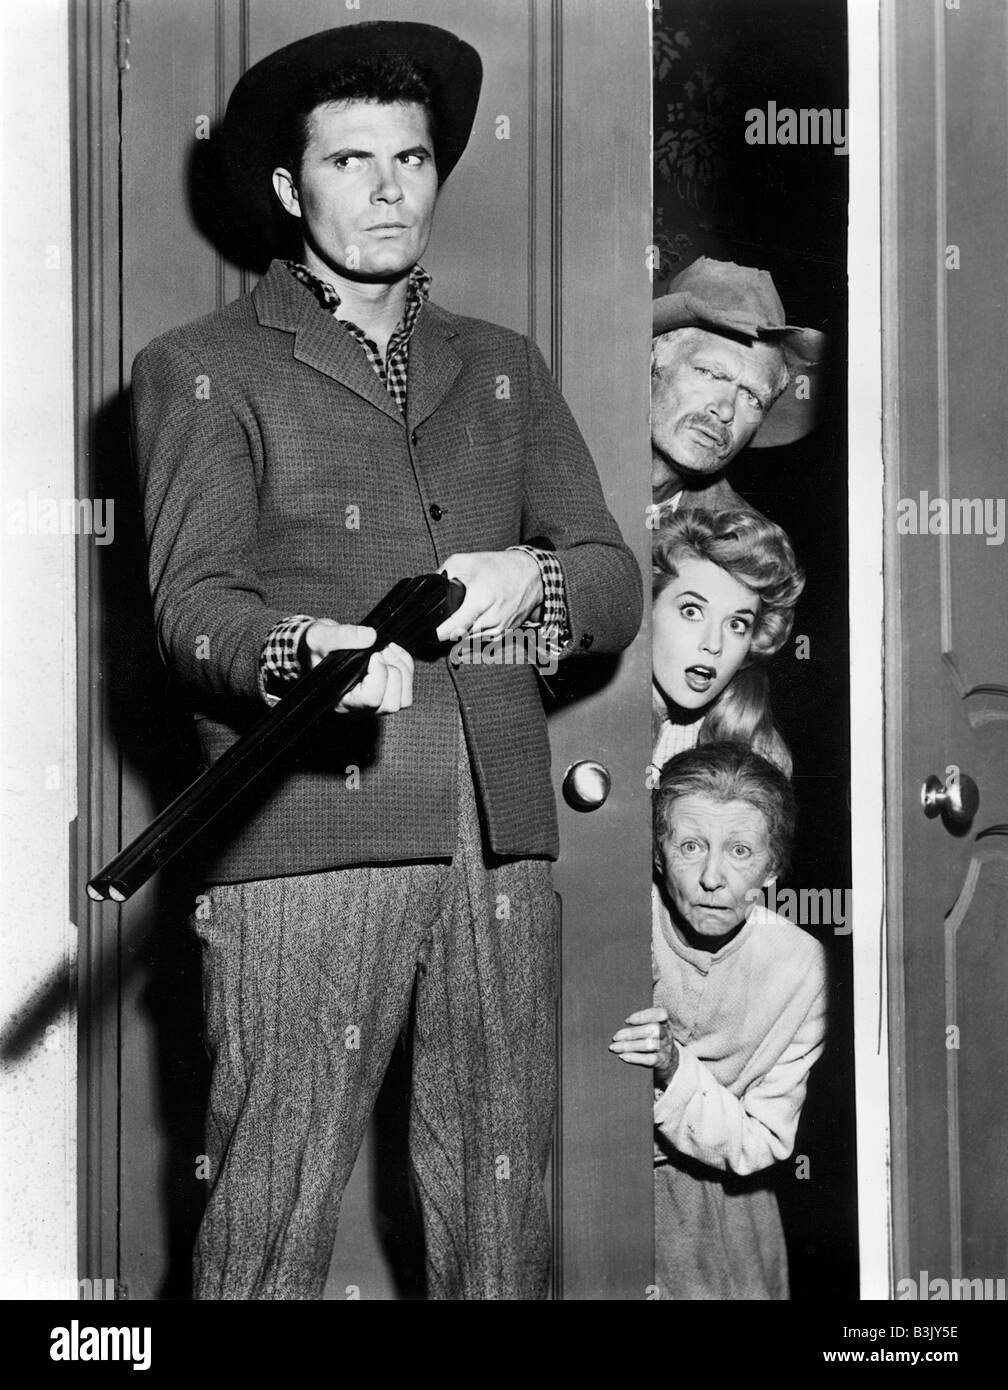 the-beverly-hillbillies-us-tv-series-with-max-baer-with-gun-and-in-B3JY5E.jpg